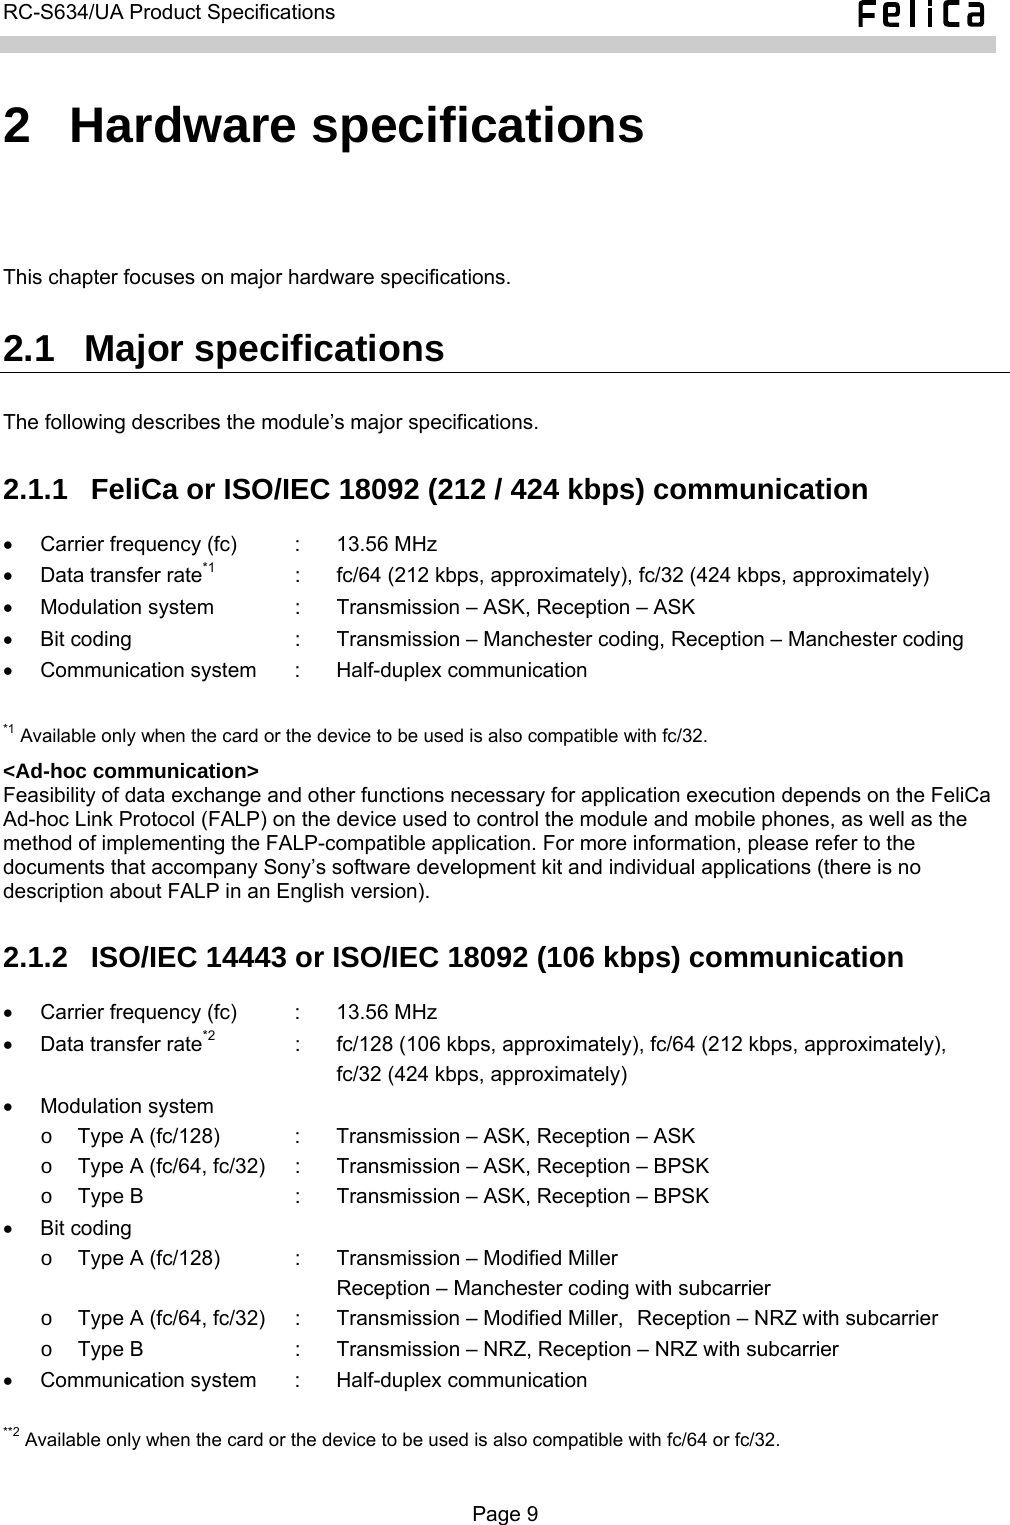   RC-S634/UA Product Specifications  2  Hardware specifications This chapter focuses on major hardware specifications. 2.1  Major specifications The following describes the module’s major specifications. 2.1.1  FeliCa or ISO/IEC 18092 (212 / 424 kbps) communication •  Carrier frequency (fc)  :  13.56 MHz •  Data transfer rate*1  :  fc/64 (212 kbps, approximately), fc/32 (424 kbps, approximately) • Modulation system  :  Transmission – ASK, Reception – ASK •  Bit coding  :  Transmission – Manchester coding, Reception – Manchester coding •  Communication system  :  Half-duplex communication  *1 Available only when the card or the device to be used is also compatible with fc/32. &lt;Ad-hoc communication&gt; Feasibility of data exchange and other functions necessary for application execution depends on the FeliCa Ad-hoc Link Protocol (FALP) on the device used to control the module and mobile phones, as well as the method of implementing the FALP-compatible application. For more information, please refer to the documents that accompany Sony’s software development kit and individual applications (there is no description about FALP in an English version). 2.1.2  ISO/IEC 14443 or ISO/IEC 18092 (106 kbps) communication •  Carrier frequency (fc)  :  13.56 MHz •  Data transfer rate*2  :  fc/128 (106 kbps, approximately), fc/64 (212 kbps, approximately),       fc/32 (424 kbps, approximately) • Modulation system o  Type A (fc/128)  :  Transmission – ASK, Reception – ASK o  Type A (fc/64, fc/32)  :  Transmission – ASK, Reception – BPSK o  Type B  :  Transmission – ASK, Reception – BPSK • Bit coding o  Type A (fc/128)  :  Transmission – Modified Miller      Reception – Manchester coding with subcarrier o  Type A (fc/64, fc/32)  :  Transmission – Modified Miller,  Reception – NRZ with subcarrier o  Type B  :  Transmission – NRZ, Reception – NRZ with subcarrier •  Communication system  :  Half-duplex communication  **2 Available only when the card or the device to be used is also compatible with fc/64 or fc/32.  Page 9  